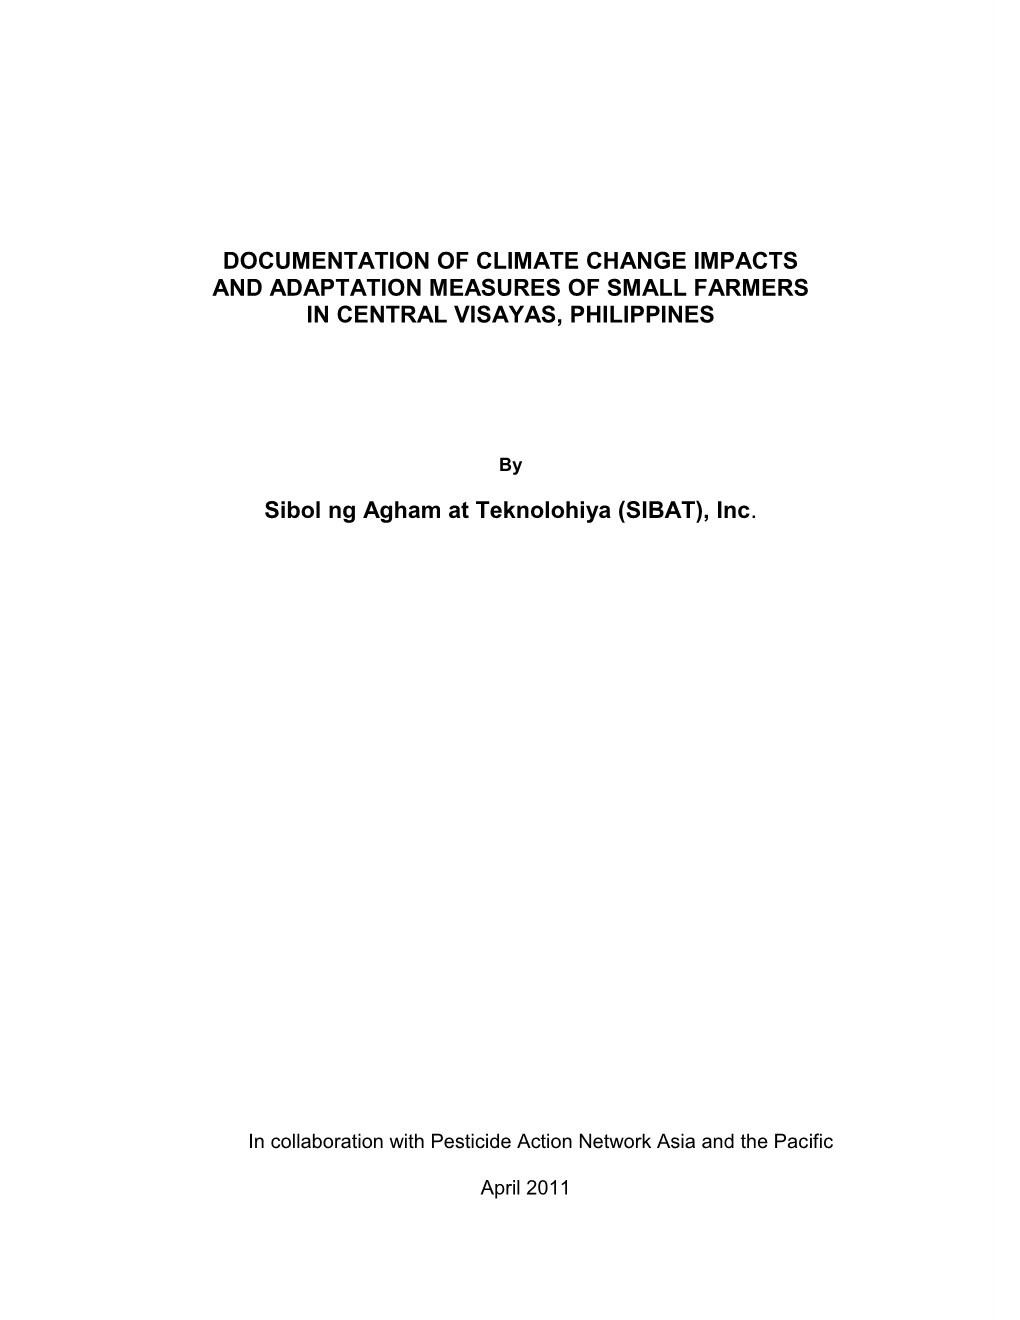 Documentation of Climate Change Impacts and Adaptation Measures of Small Farmers in Central Visayas, Philippines